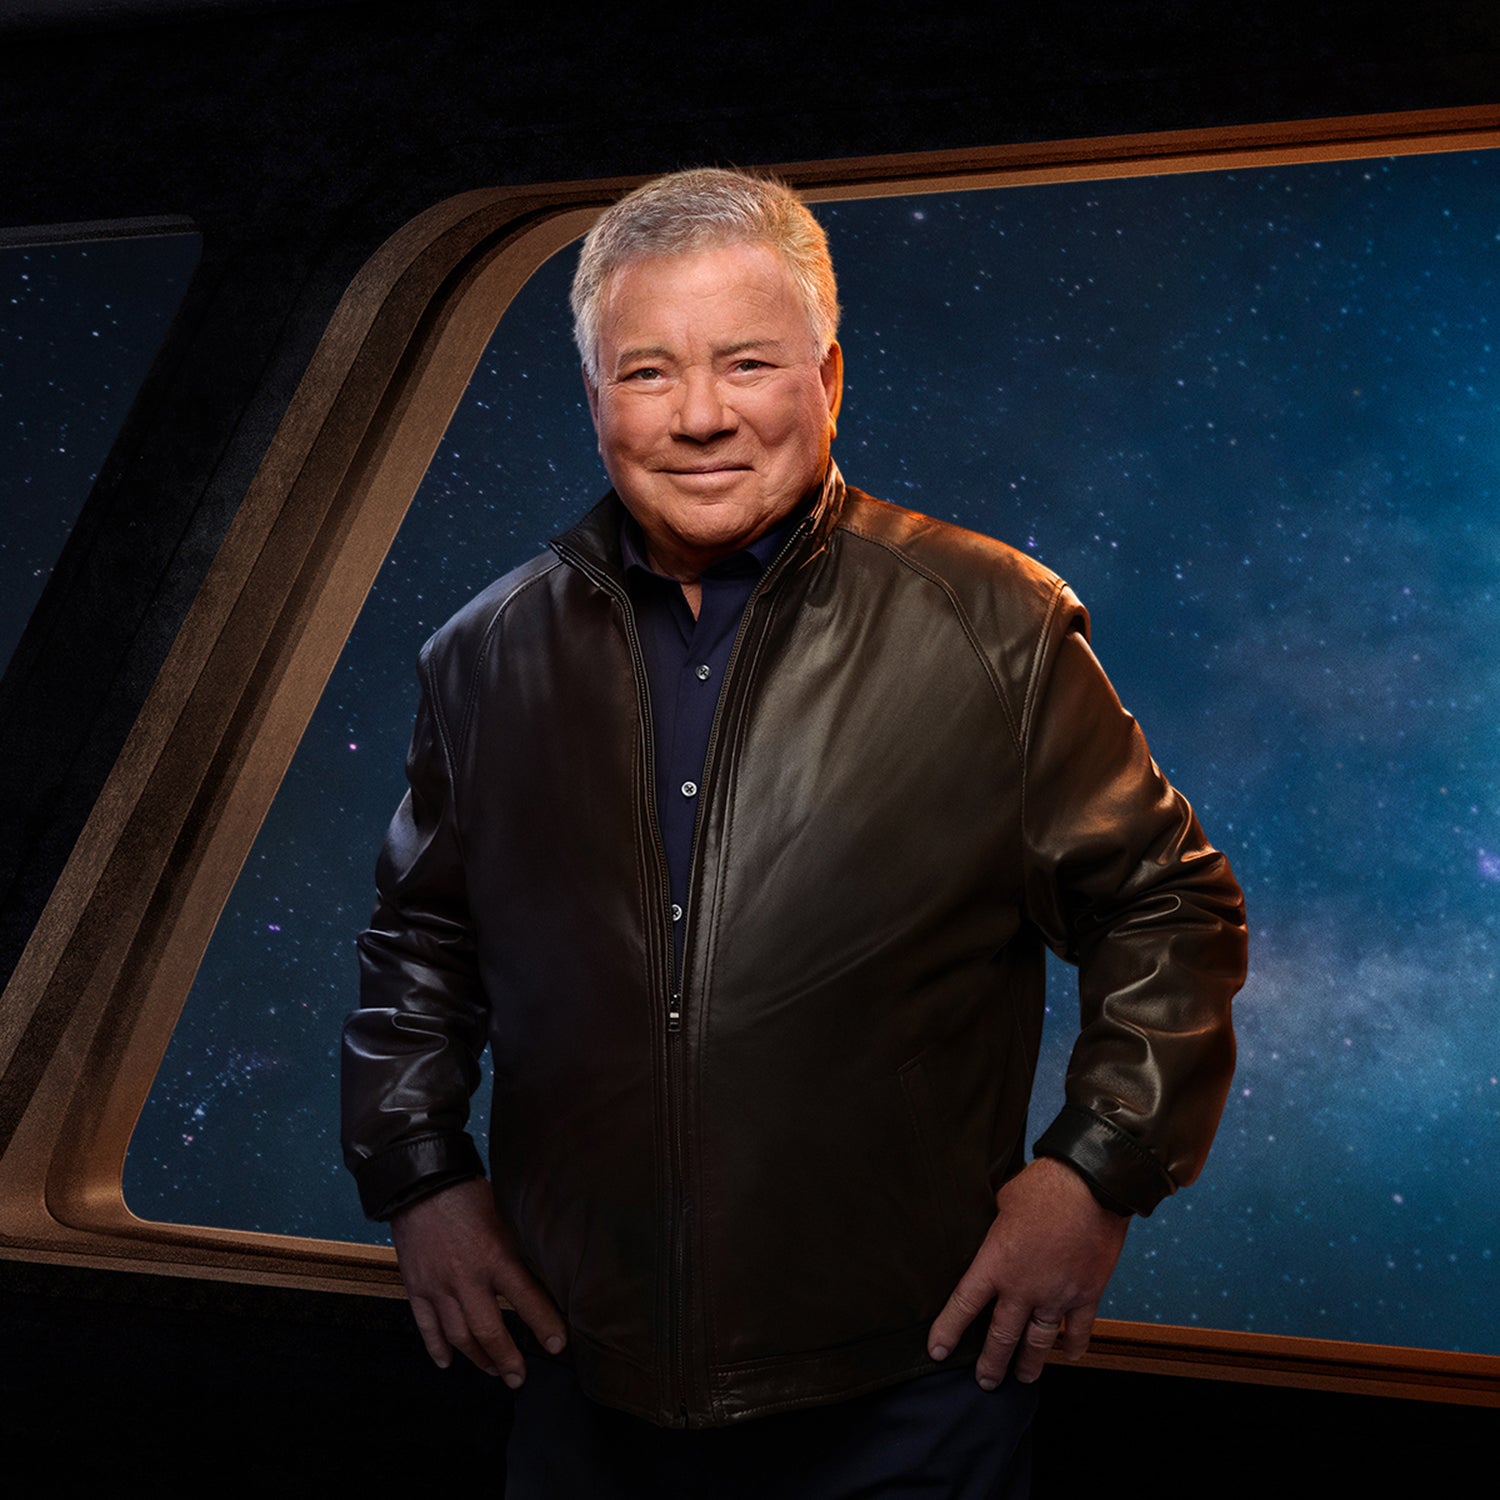 william shatner on travel to space